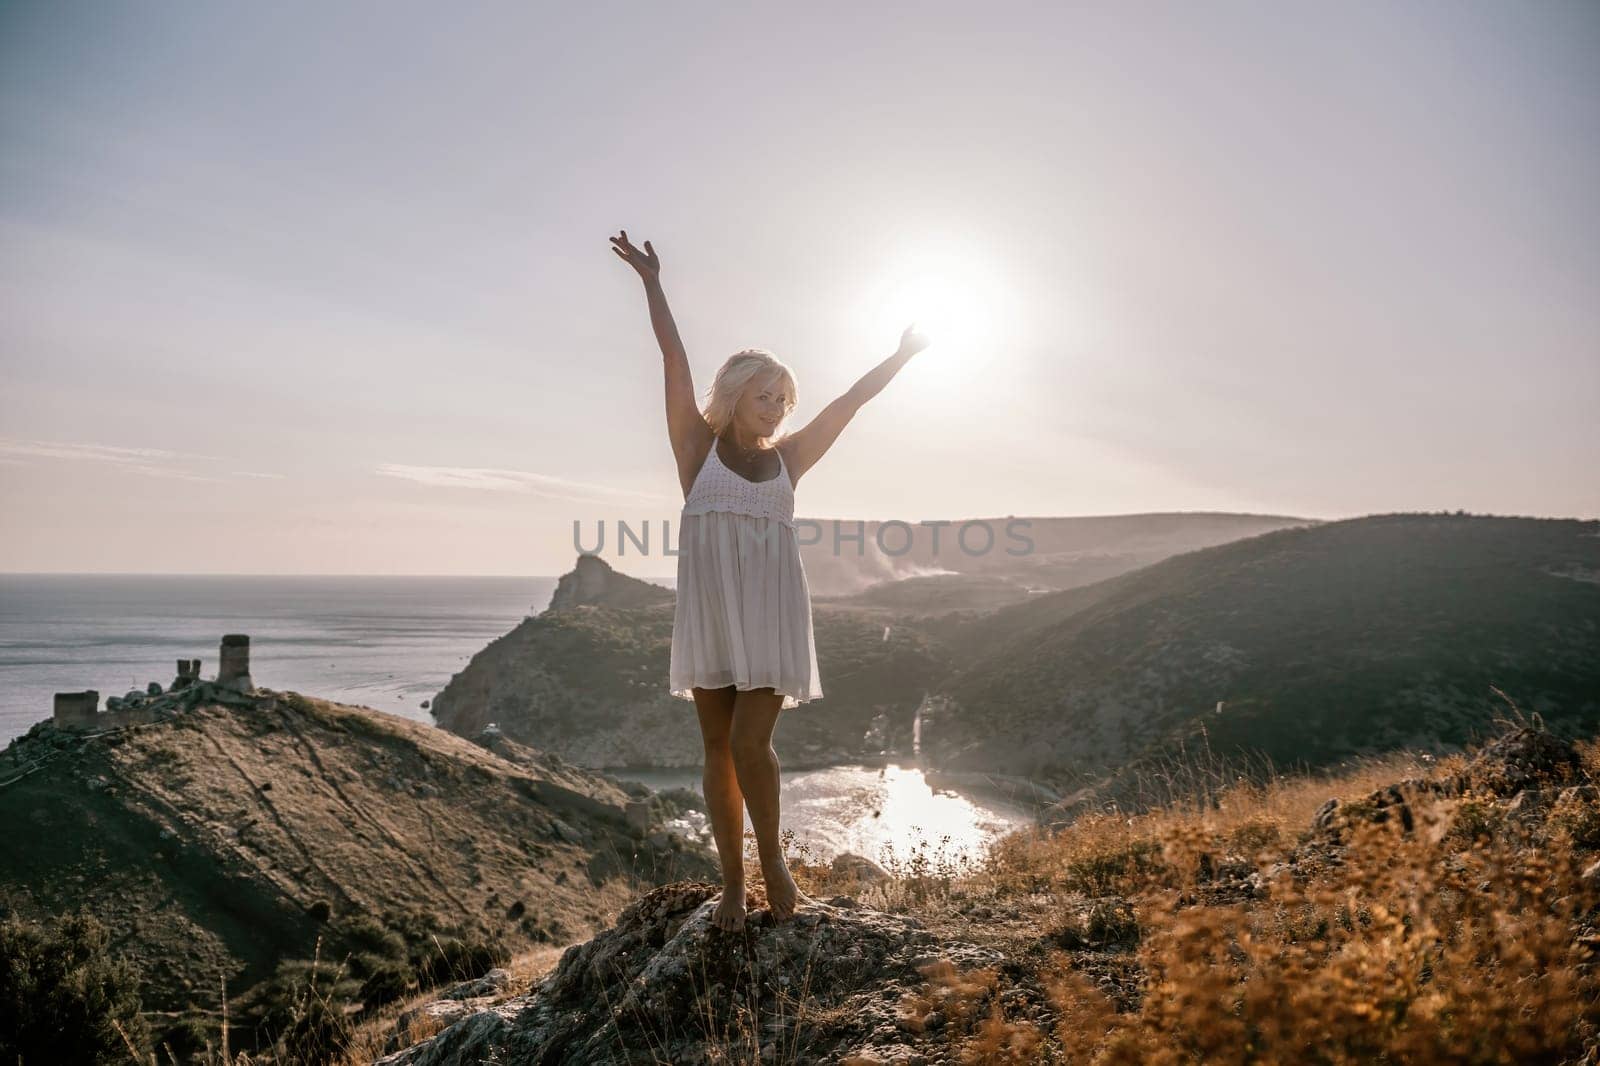 woman standing hill with her arms raised in the air, looking up at the sun. The scene is peaceful and serene, with the woman's expression conveying a sense of joy and happiness. by Matiunina